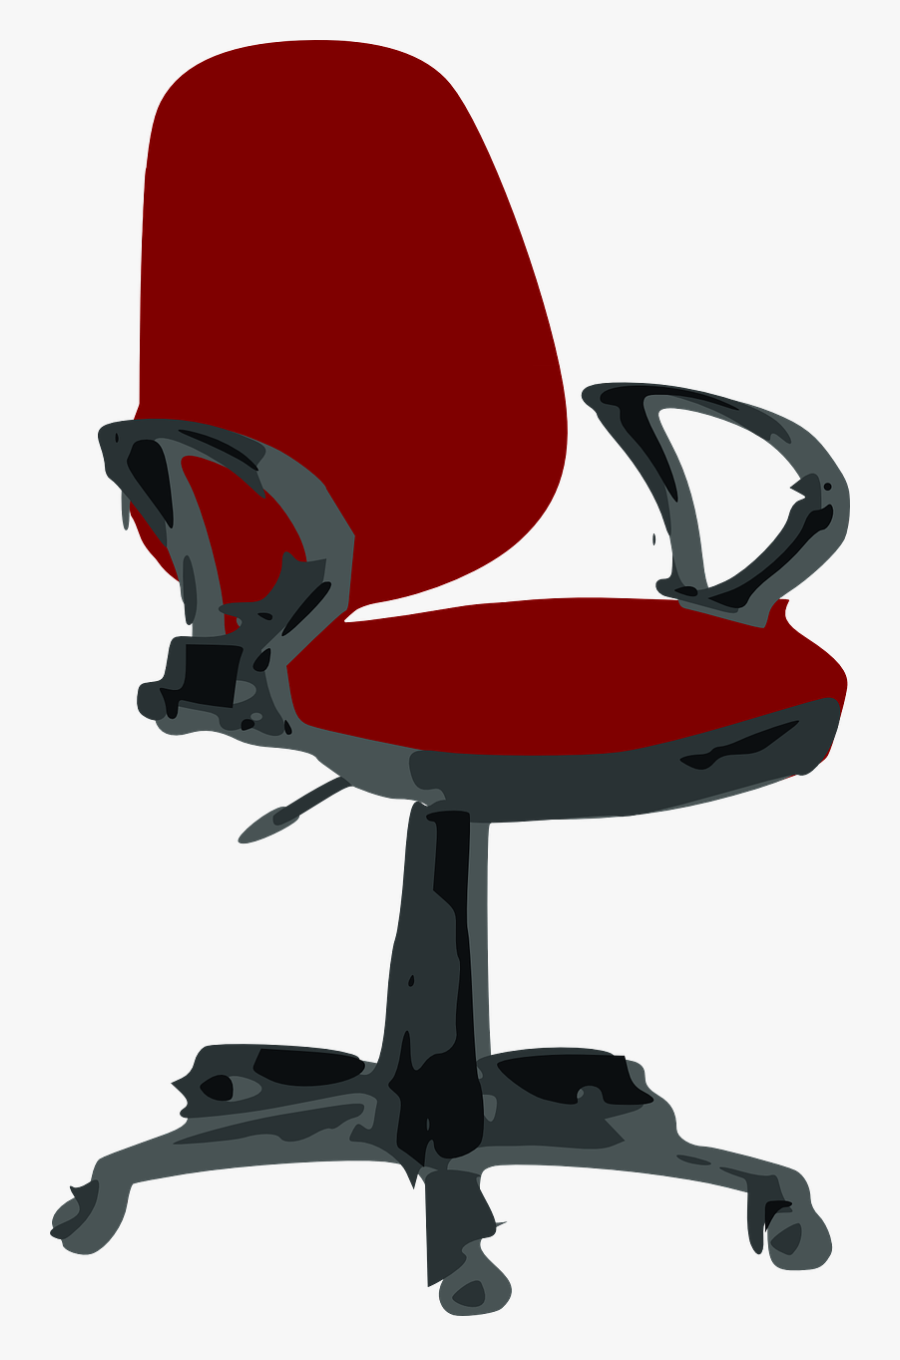 Chair Office Desk Free Picture - Sensor In Daily Life, Transparent Clipart